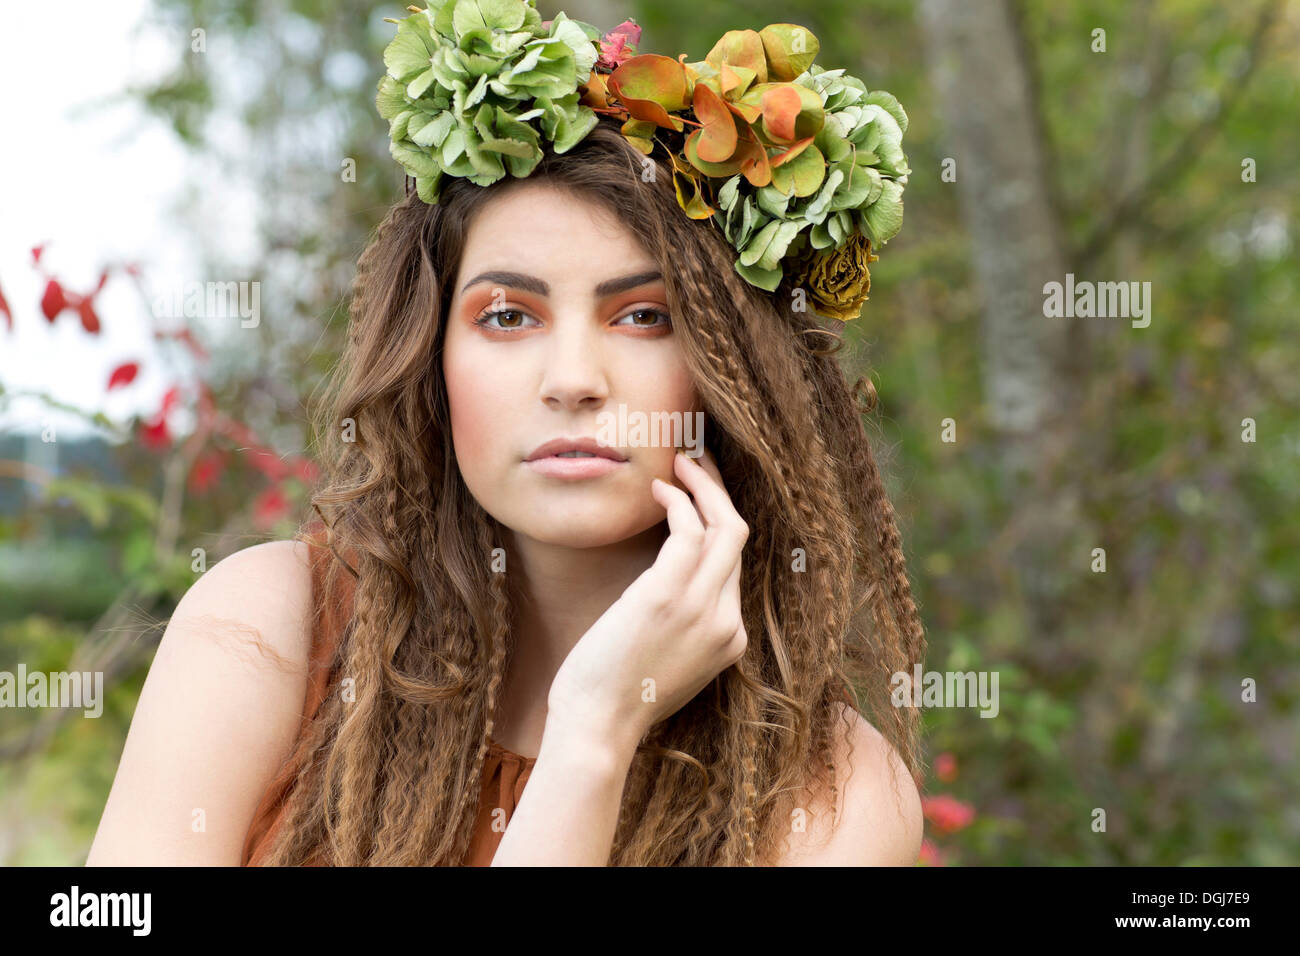 Young woman with a flowal wreath in her hair, outdoors, portrait Stock Photo